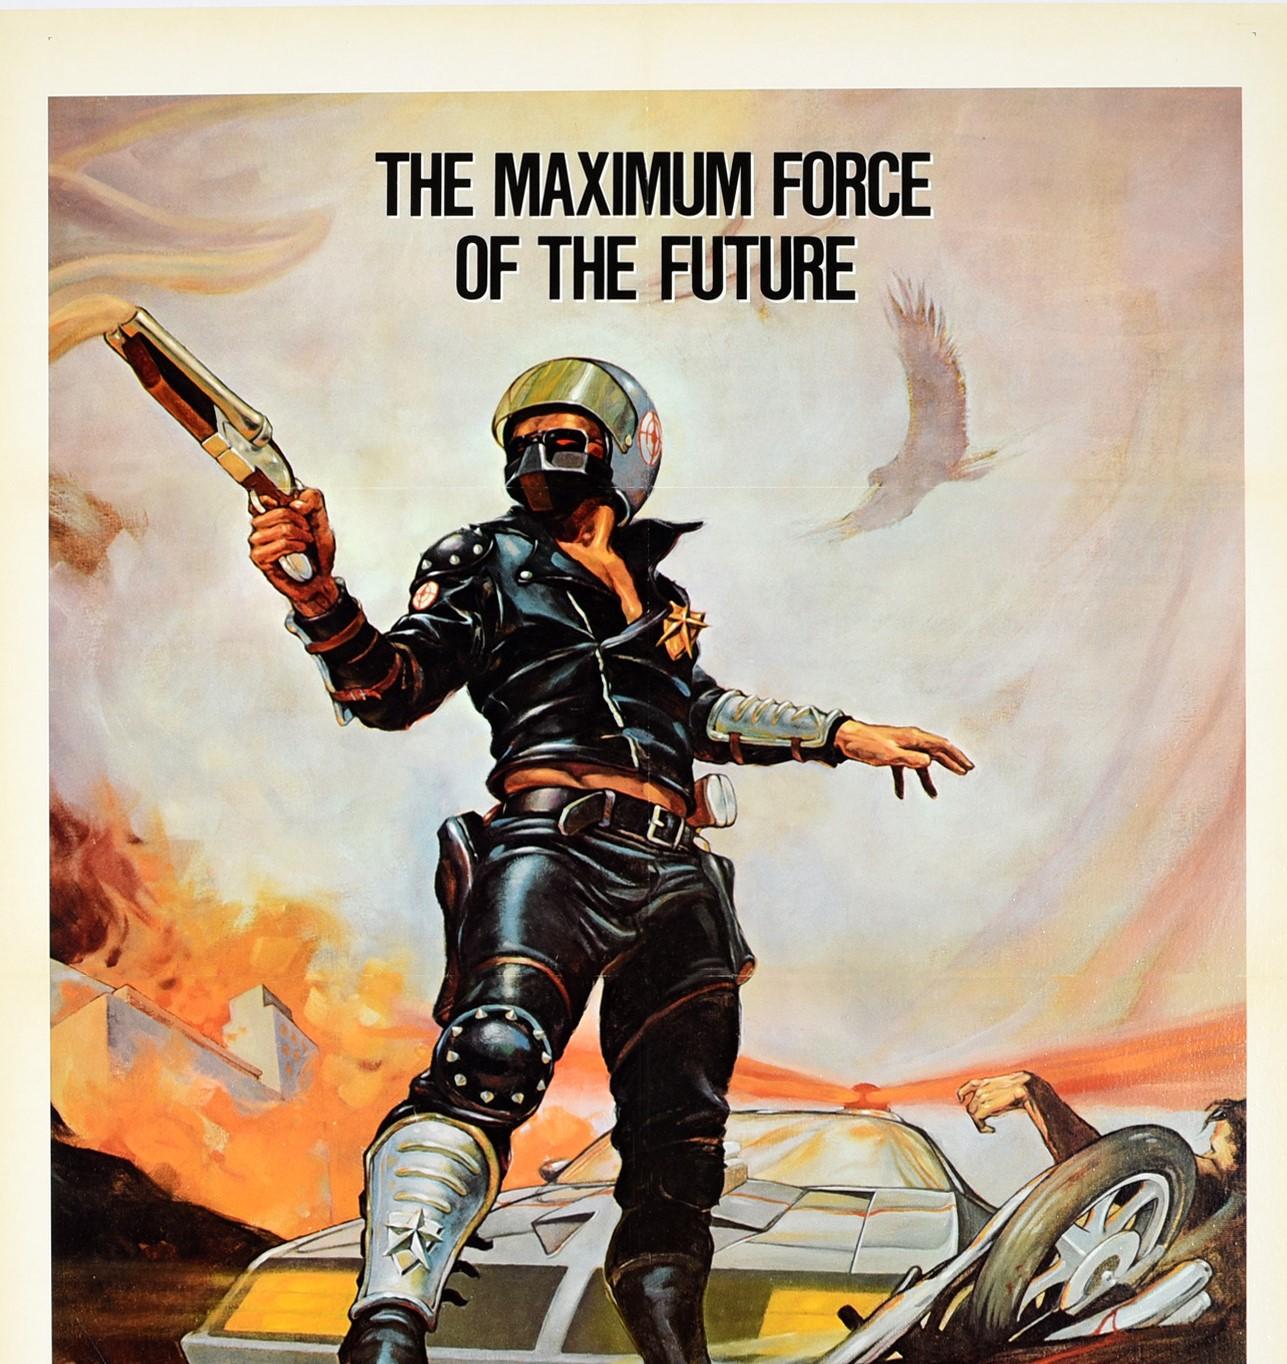 Original vintage movie poster for the cult science fiction film Mad Max - The maximum force of the future - directed by George Miller and starring Mel Gibson with music by Brian May featuring a dynamic image of a man wearing a black leather police